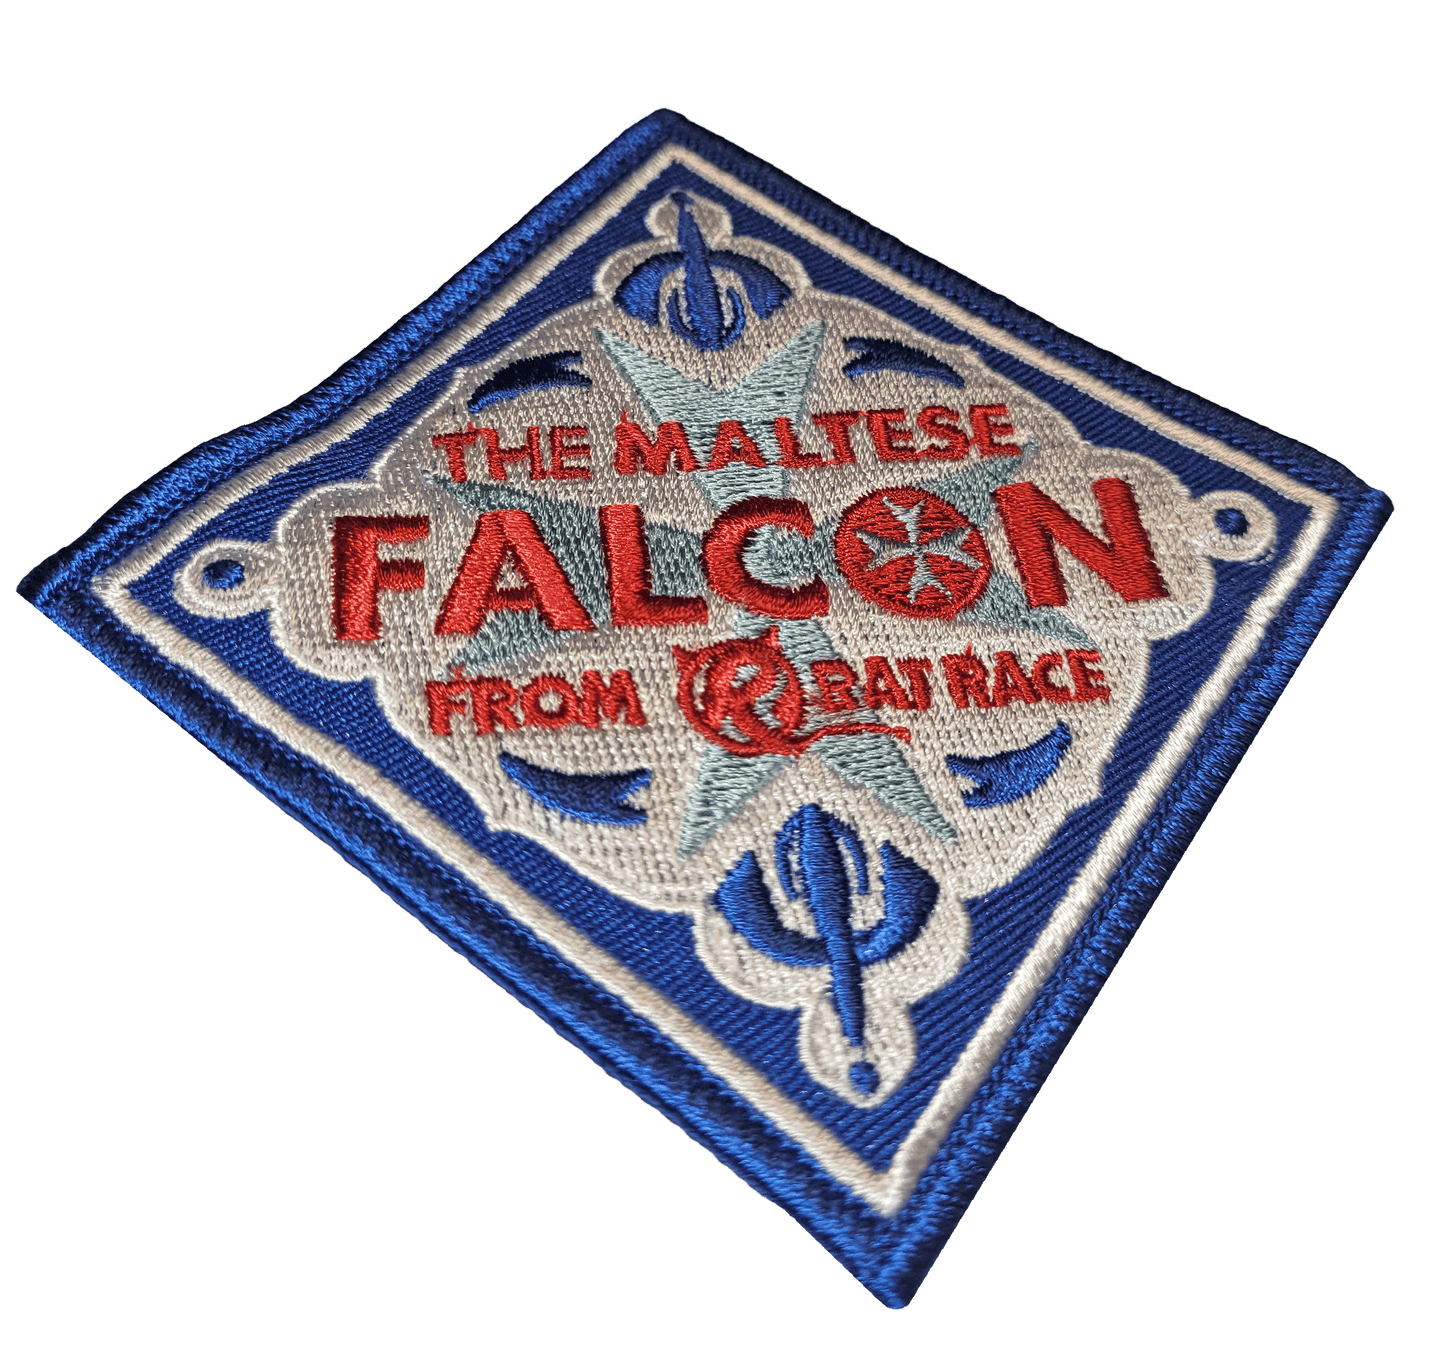 Maltese Falcon Sew On Patch